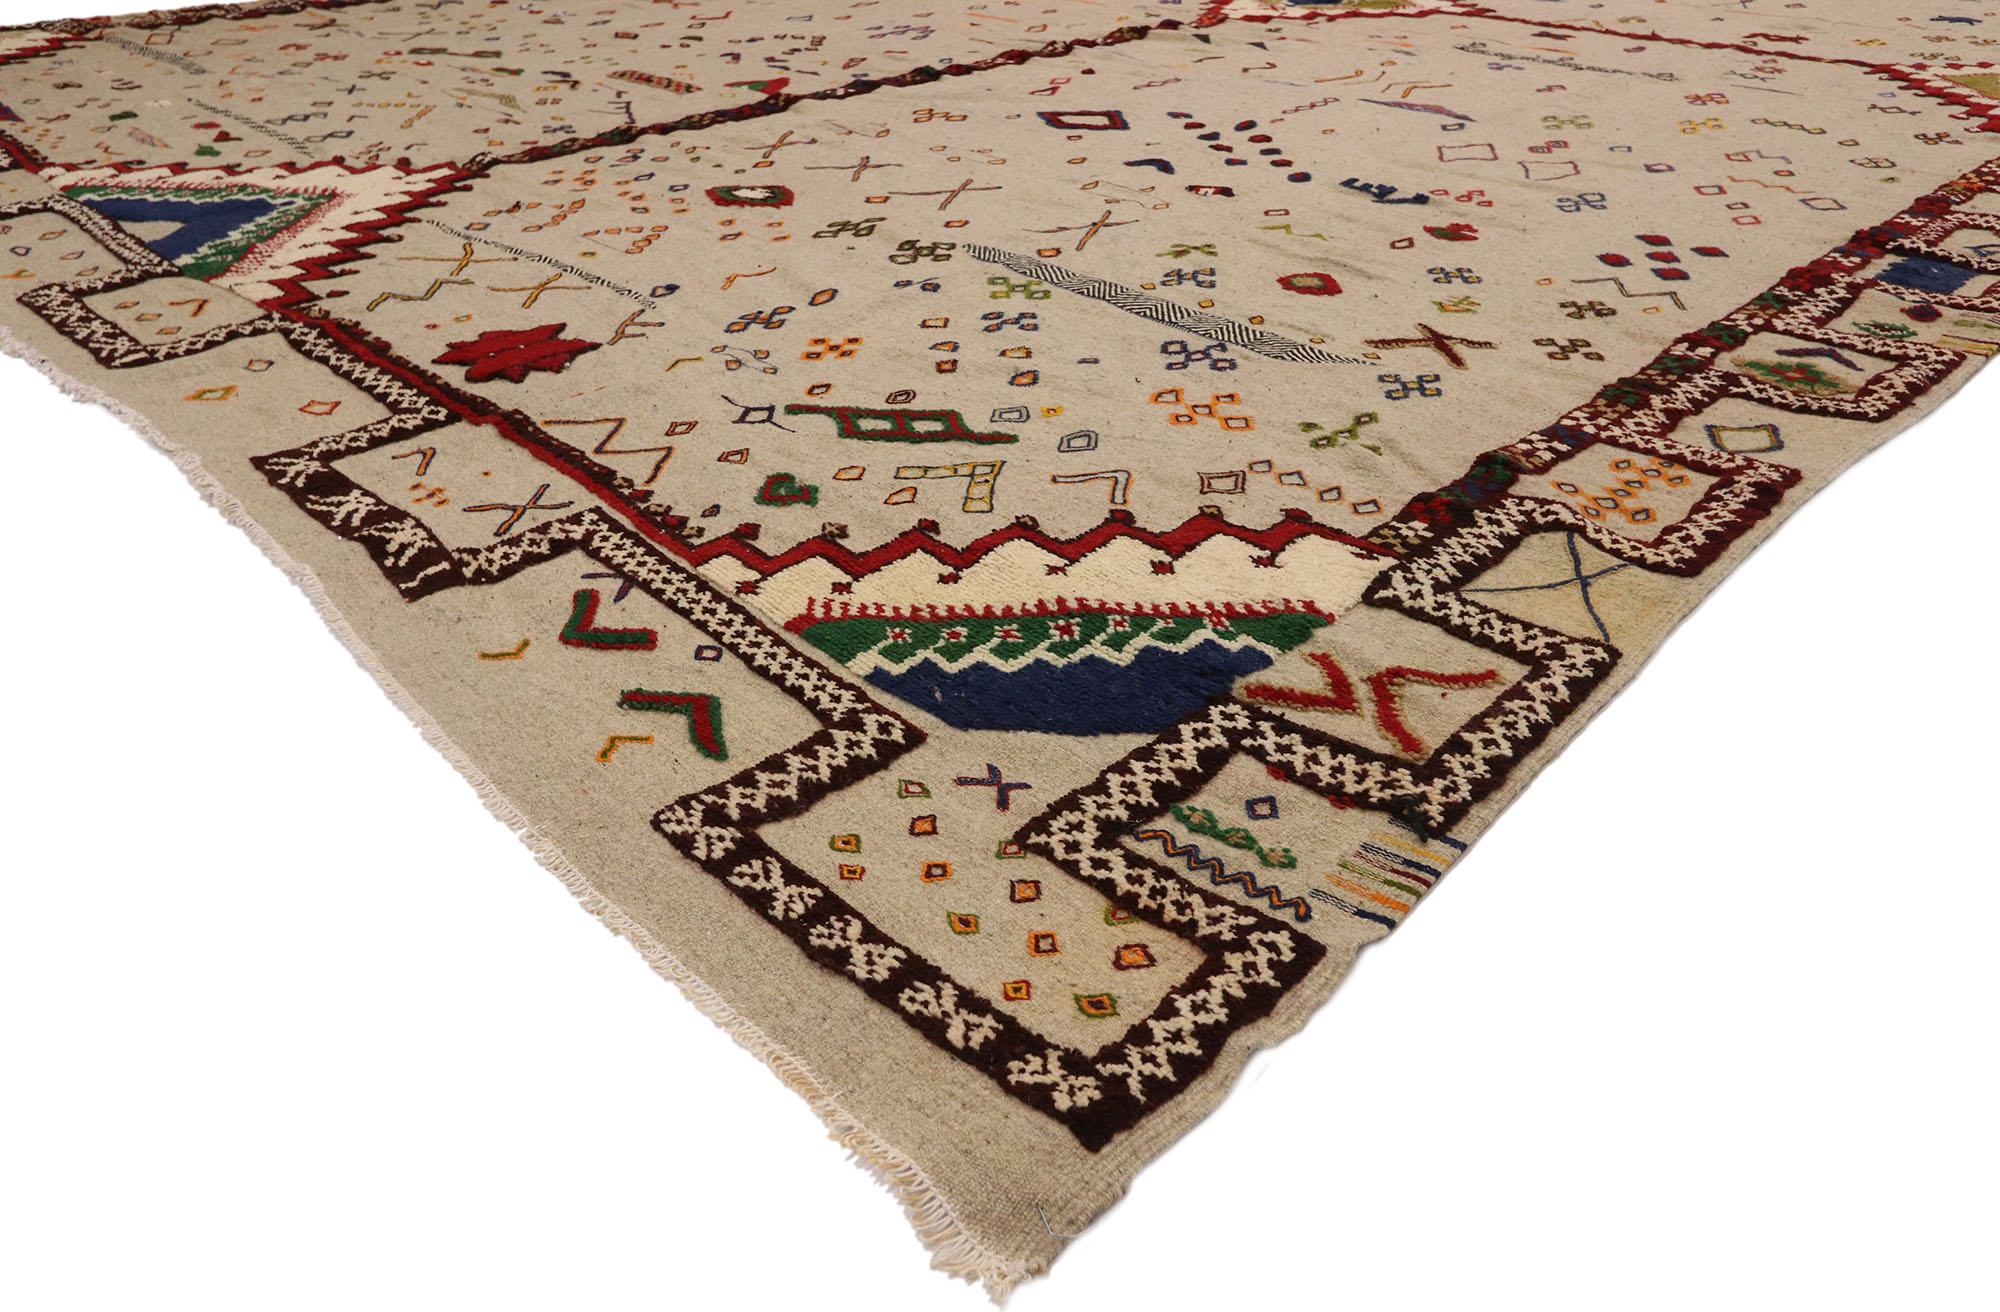 20923, Oversized vintage Berber Moroccan Glaoui Kilim high-low rug 12'10 x 17'08. With its bold expressive design, incredible detail and texture, this Berber Moroccan Kilim Glaoui rug is a captivating vision of woven beauty highlighting the three